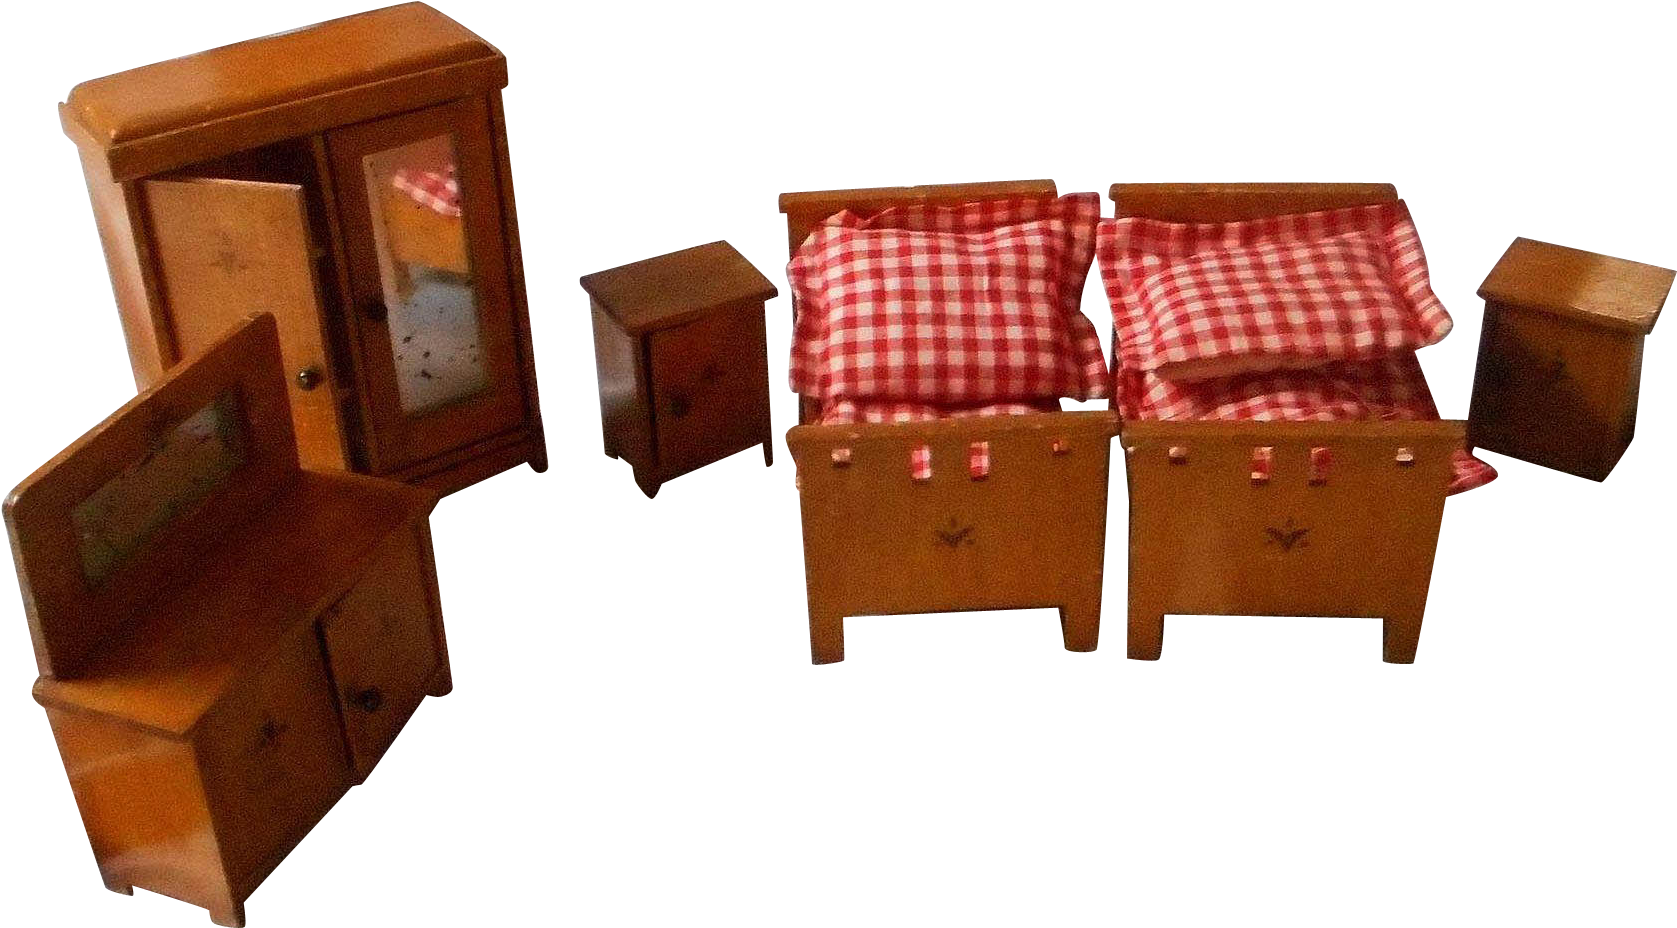 German, Vintage All Wooden Doll House Bedroom Set - Club Chair (1676x1676)